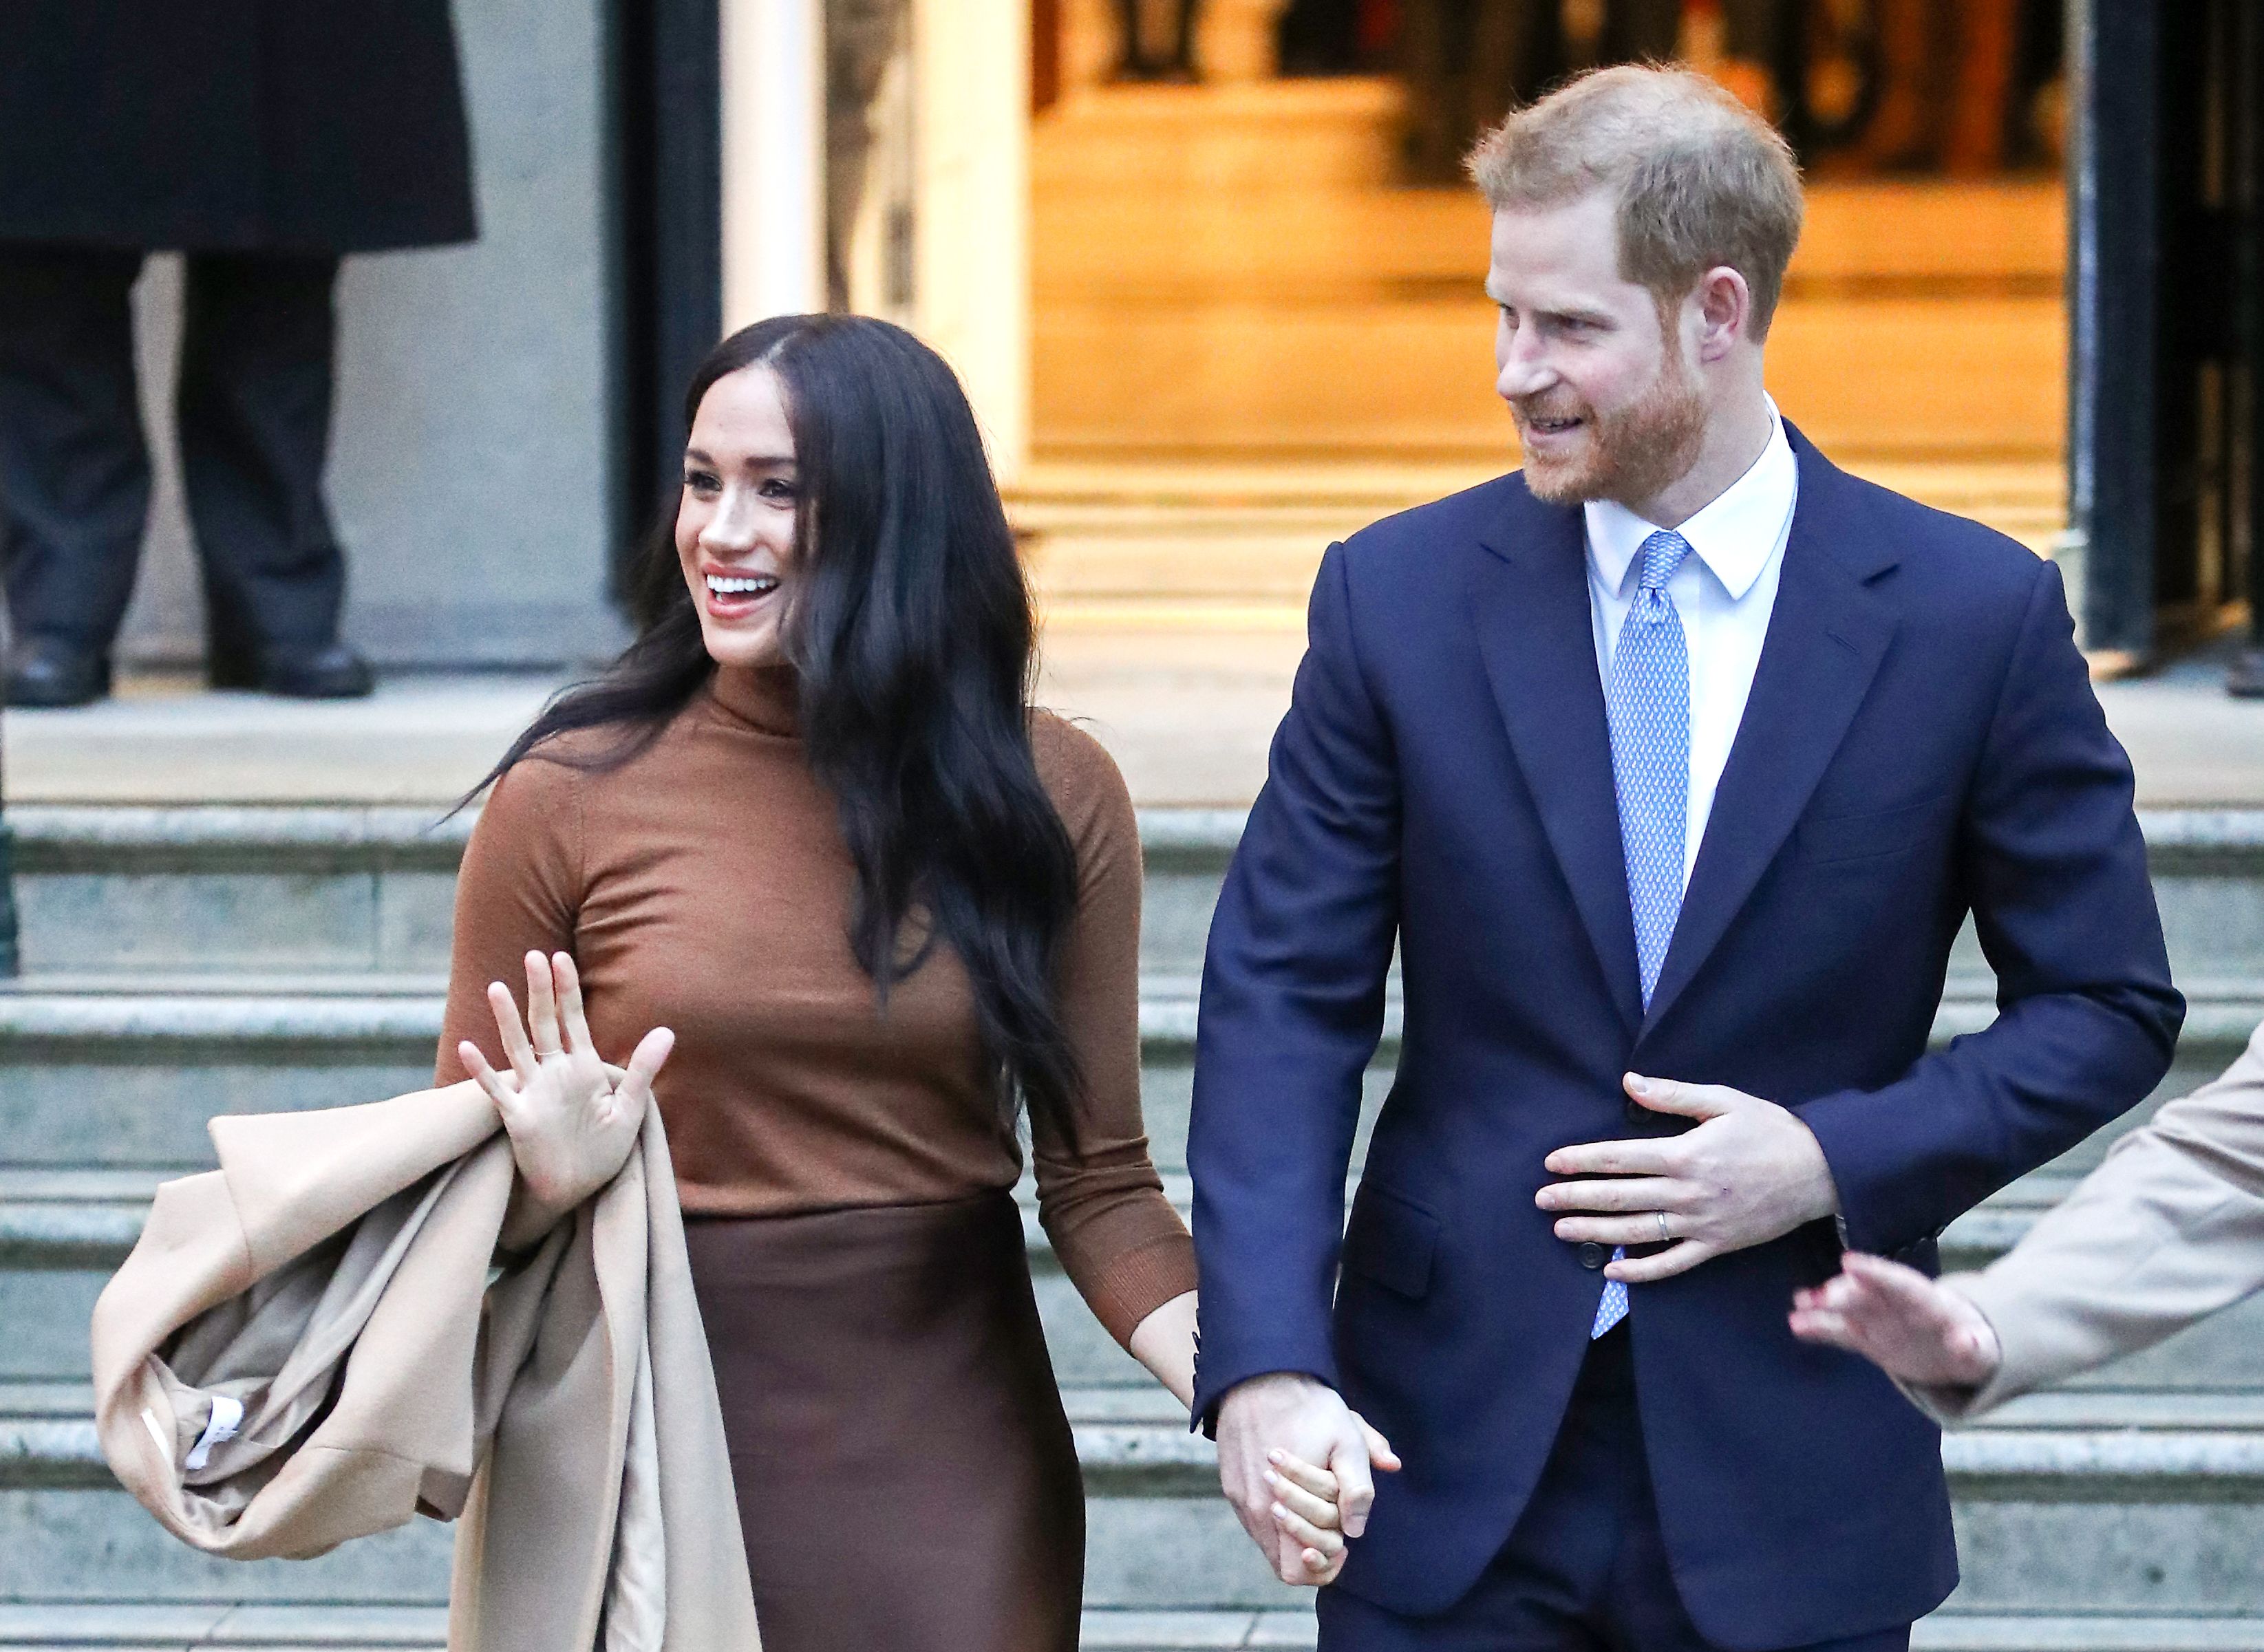 Meghan Markle and Prince Harry depart Canada House on January 07, 2020 in London, England.| Getty Images